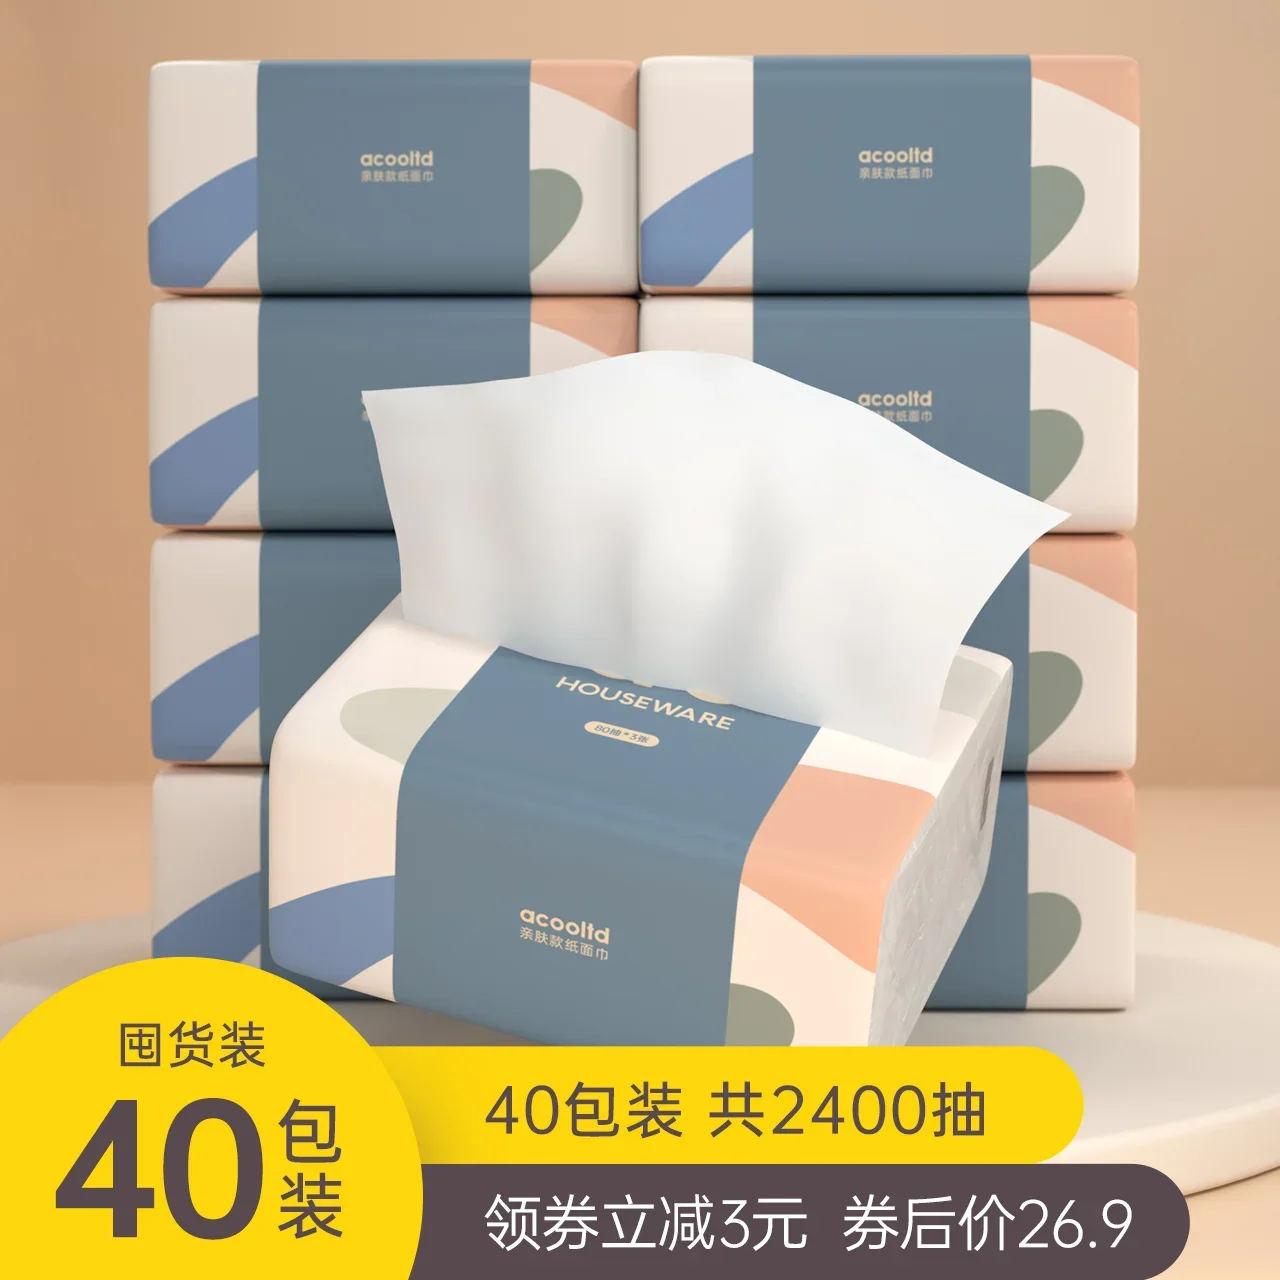 40/12 Packs Paper Extraction Large Packs Full Box Household Tissue Affordable Family Pack Napkin Hand-Wiping Facial Tissue Pumping